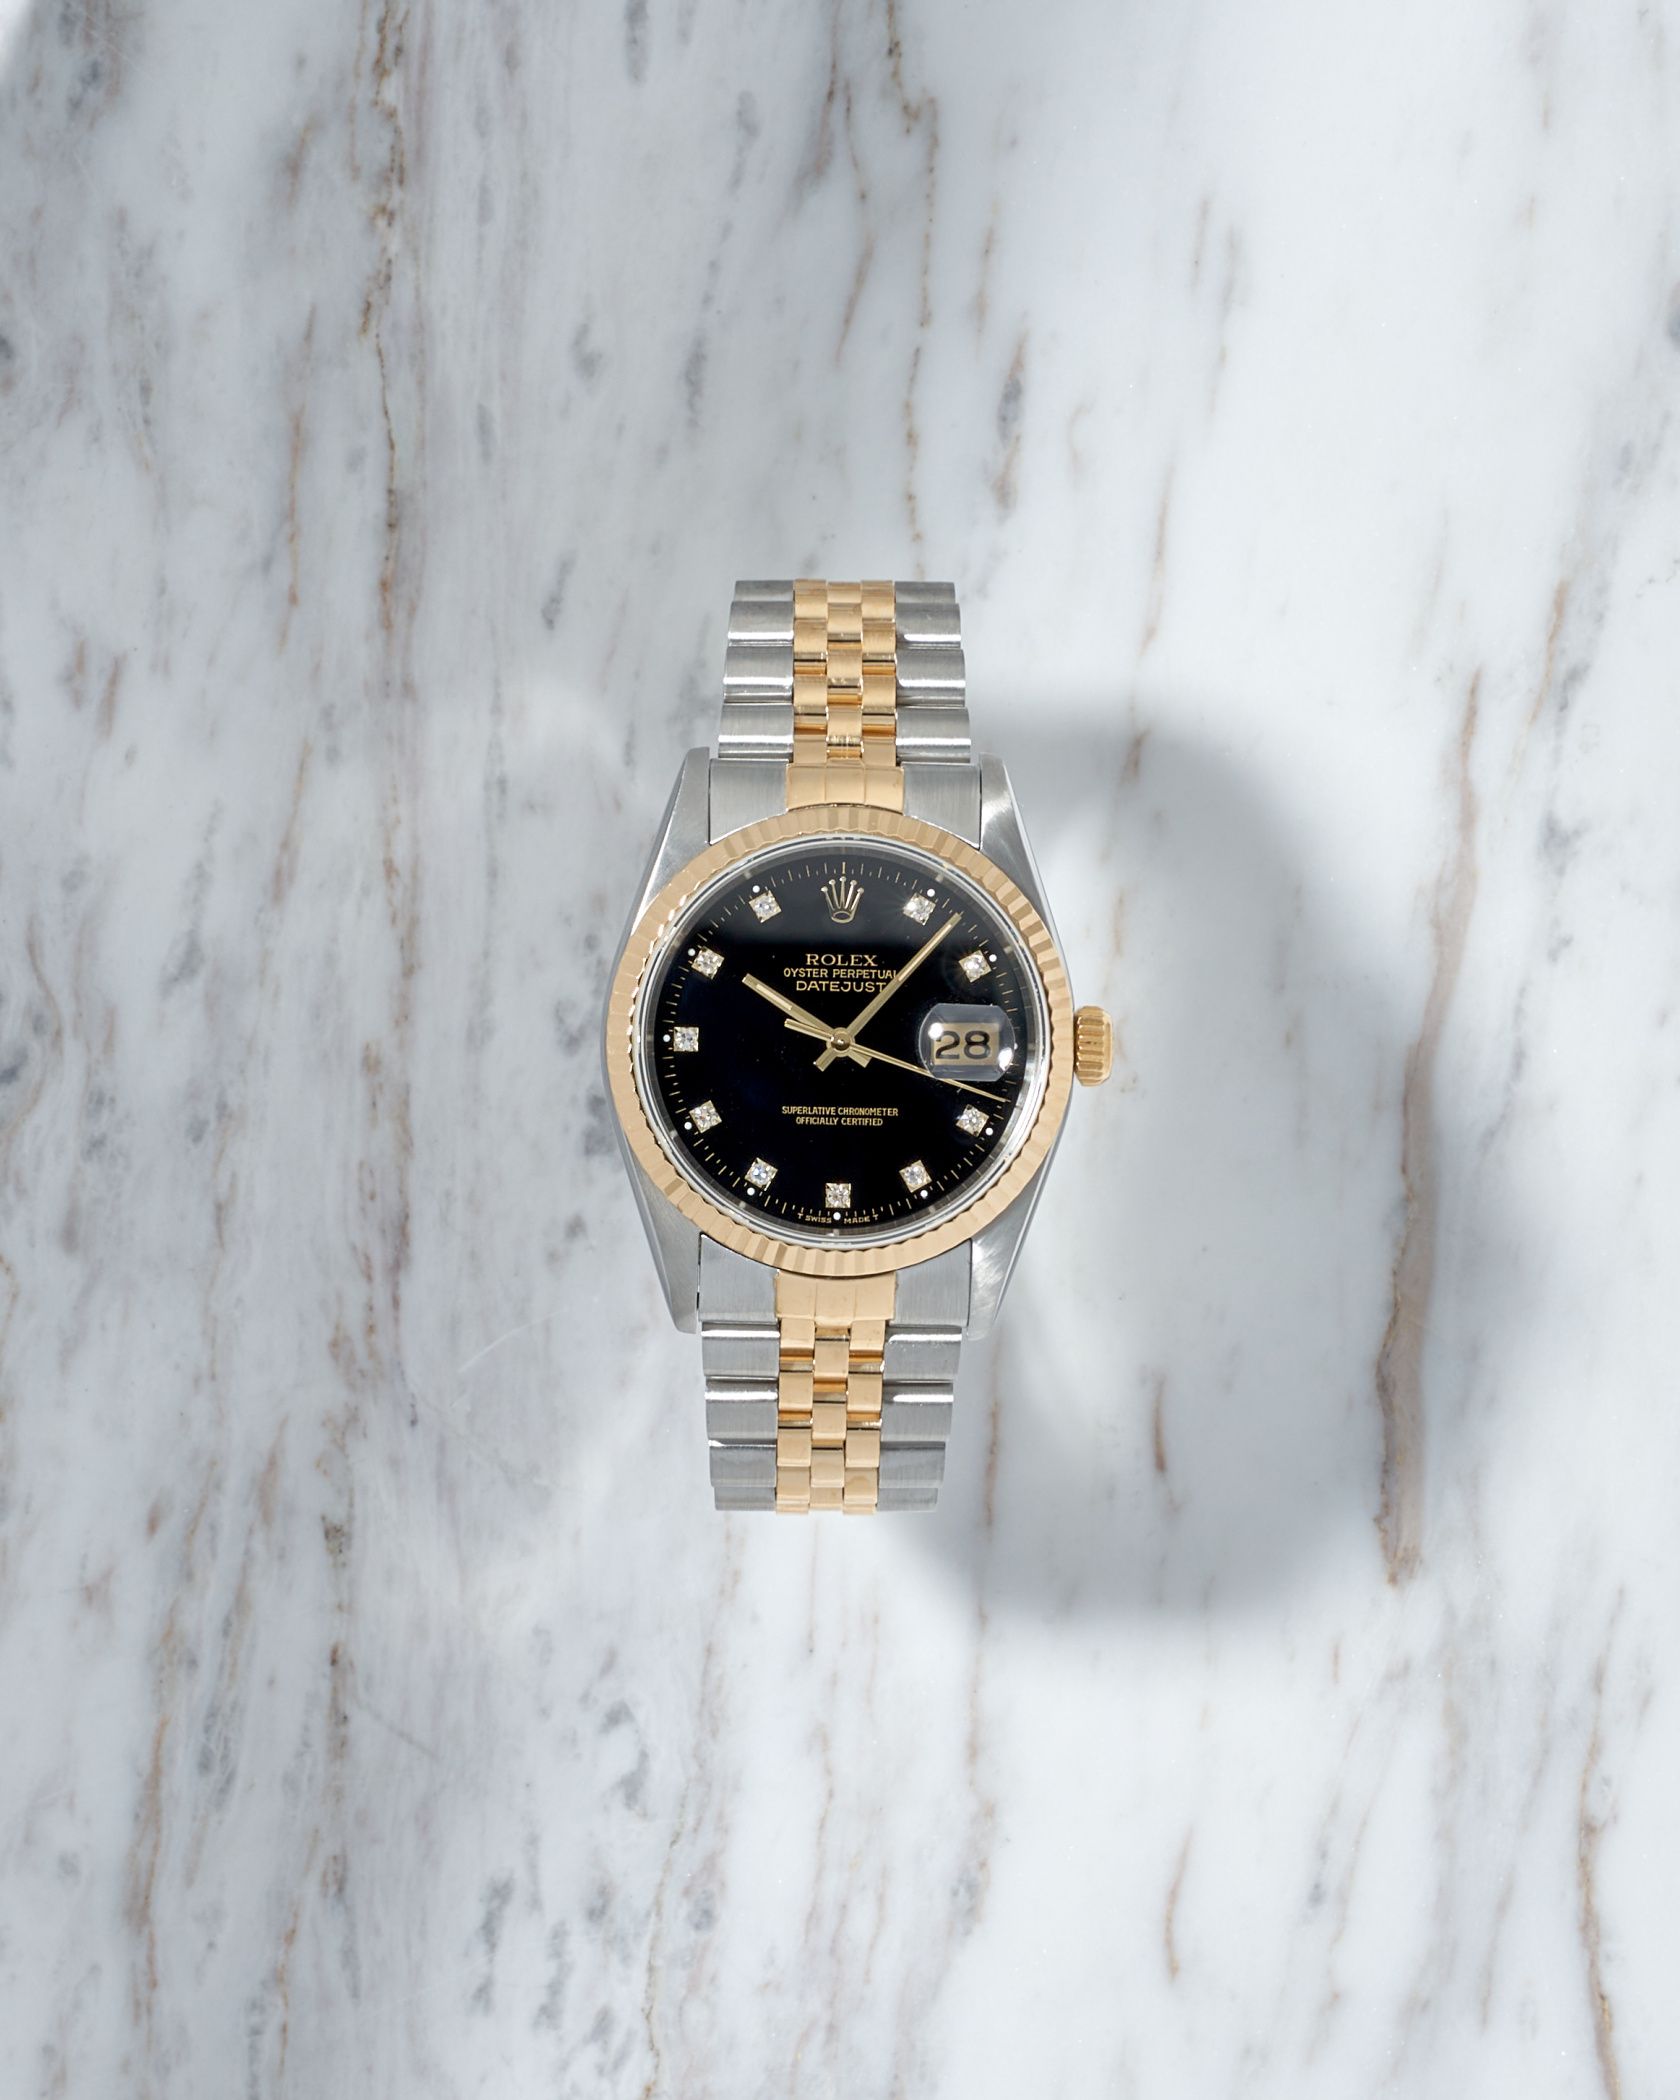 Rolex Datejust 36mm Black Dial with Diamonds S Series